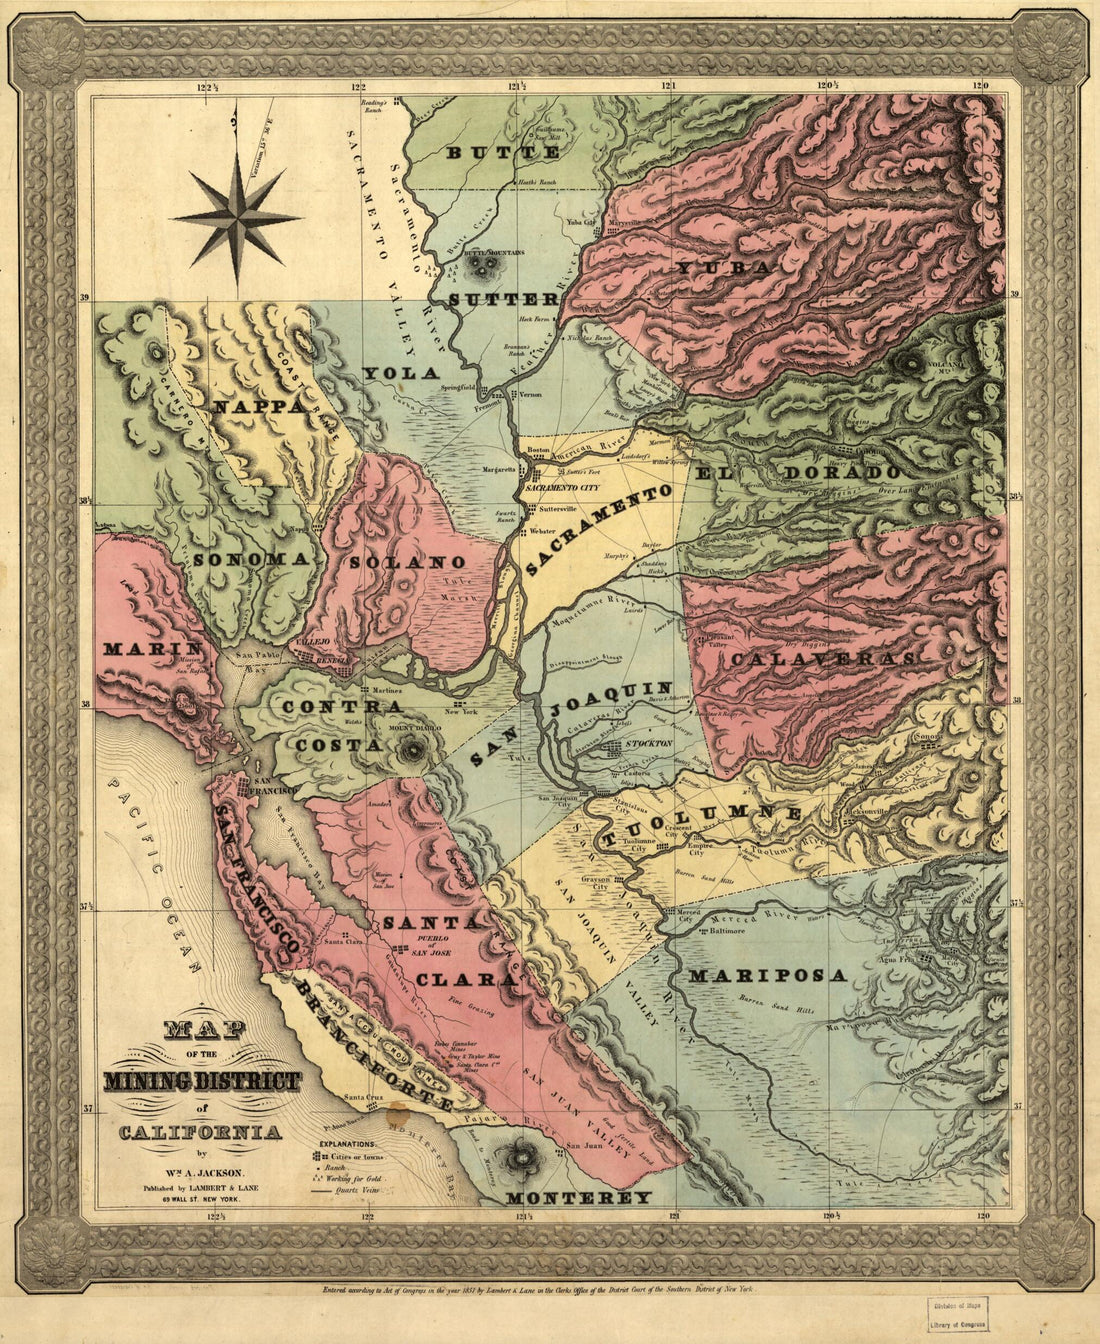 This old map of Map of the Mining District of California from 1851 was created by Wm. A. (William A.) Jackson,  Lambert &amp; Lane in 1851